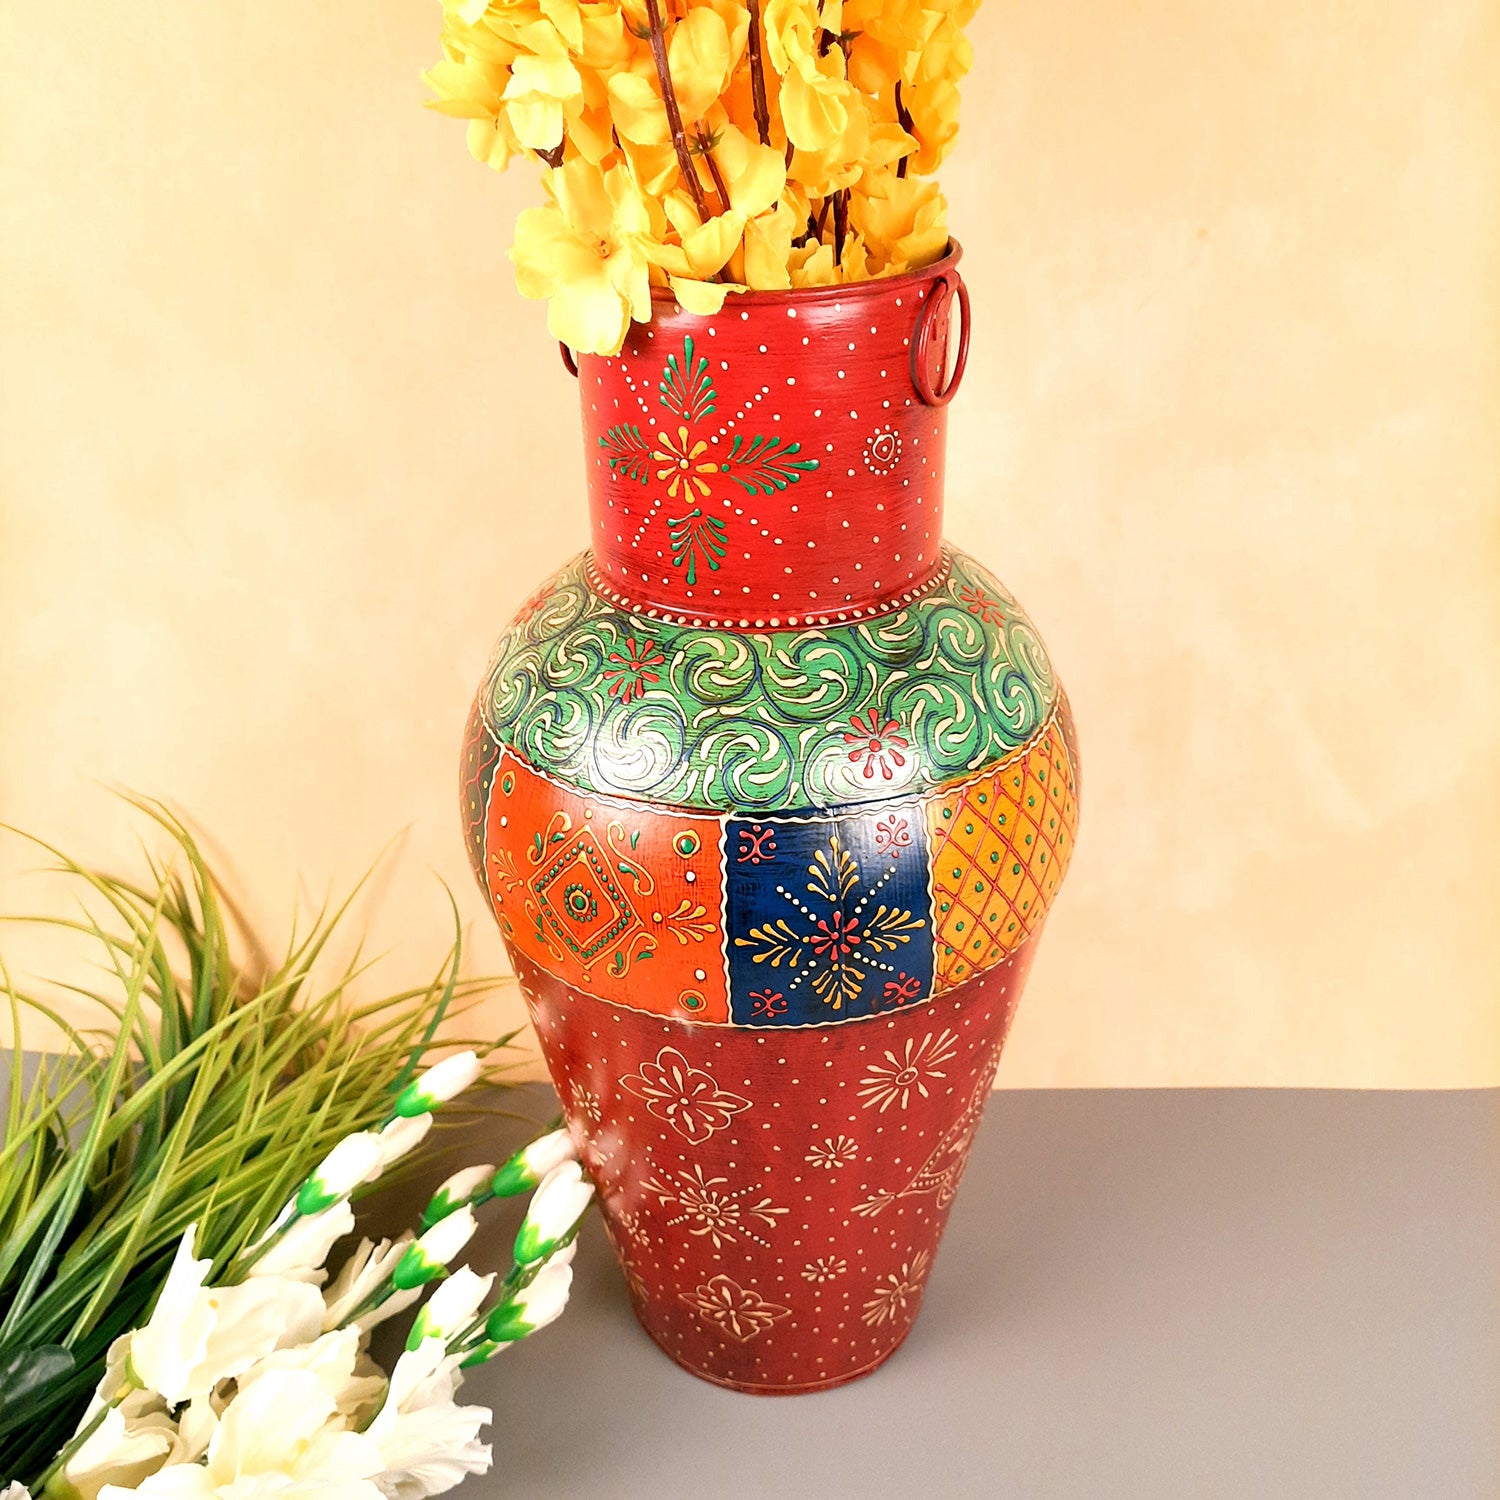 Handicraft Flower Vase Set of 3 with Antique Design Decorative Home,  Offices, Best Gifting, Made by Awarded Indian Artisan